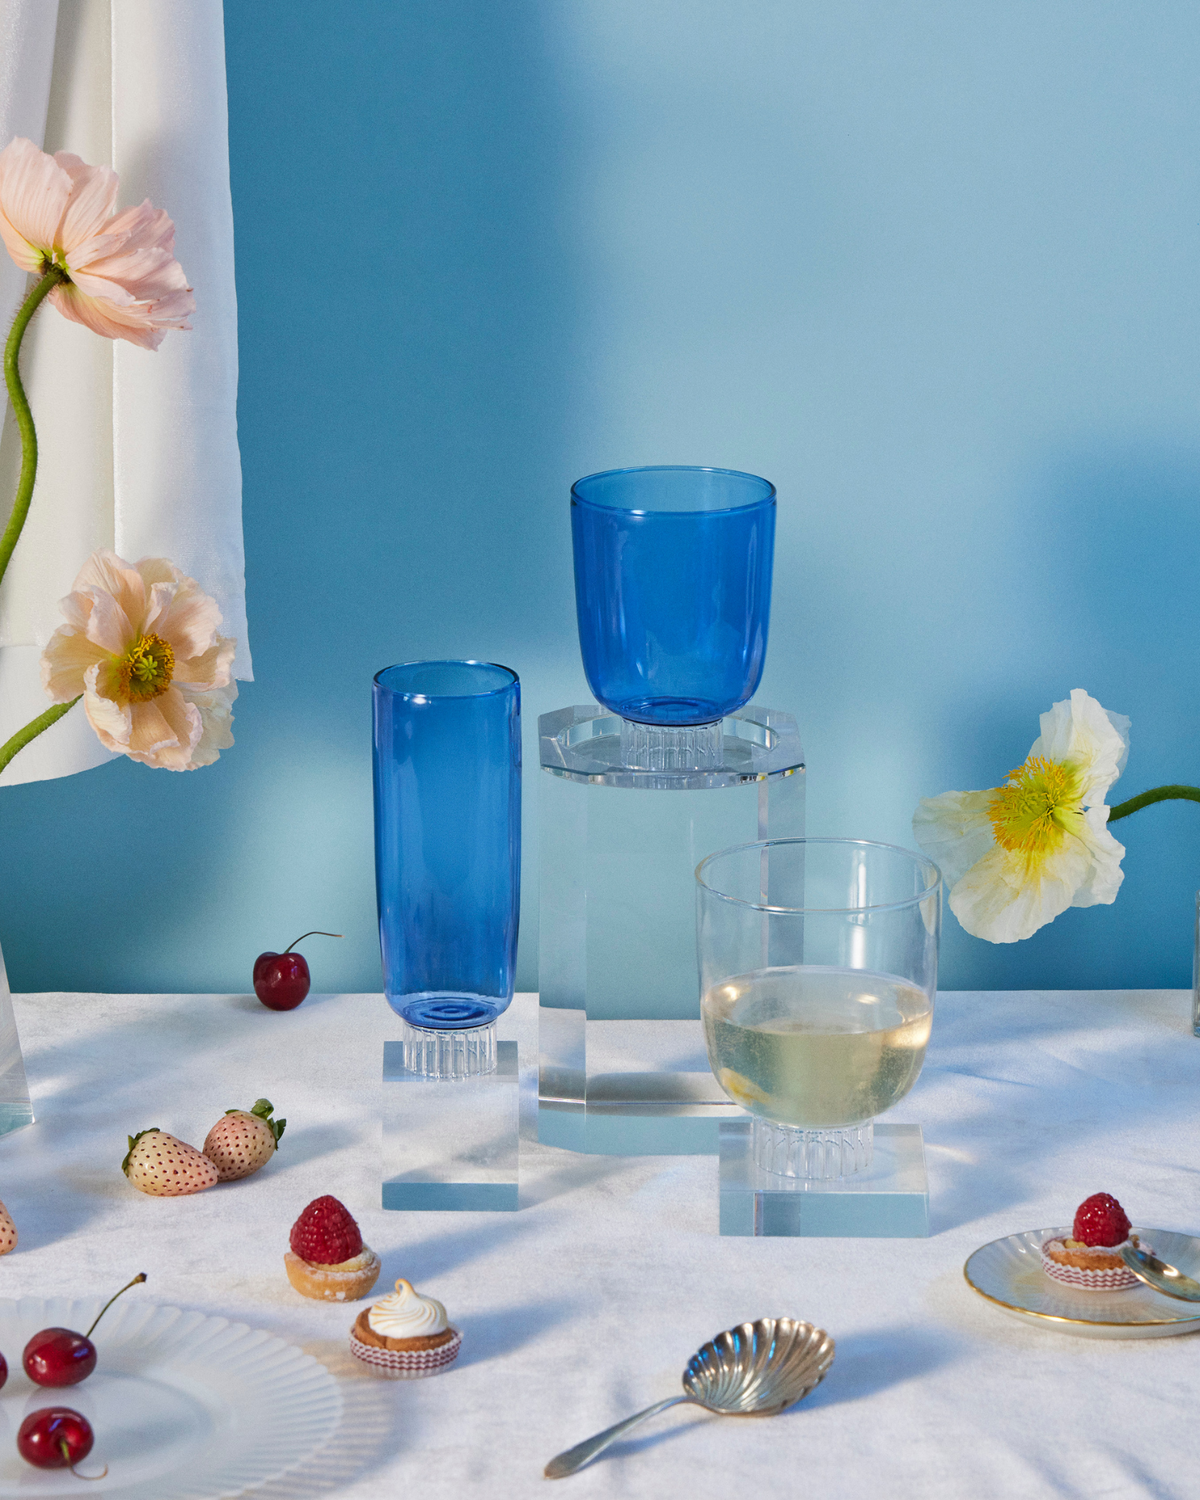 A Beautifully composed table setting that radiates a romantic vibe. At the heart of the setting is an assortment of glassware, including cobalt blue champagne flutes, clear cocktail glasses,  as well as elegant stemless wine glasses, with clear textured stems, all lending a modern and sophisticated touch. These glasses are dishwasher safe and stackable. The table also features a selection of beautiful flowers, fresh fruits and gourmet pastries, which infuse the scene with a sense of abundance and delight.